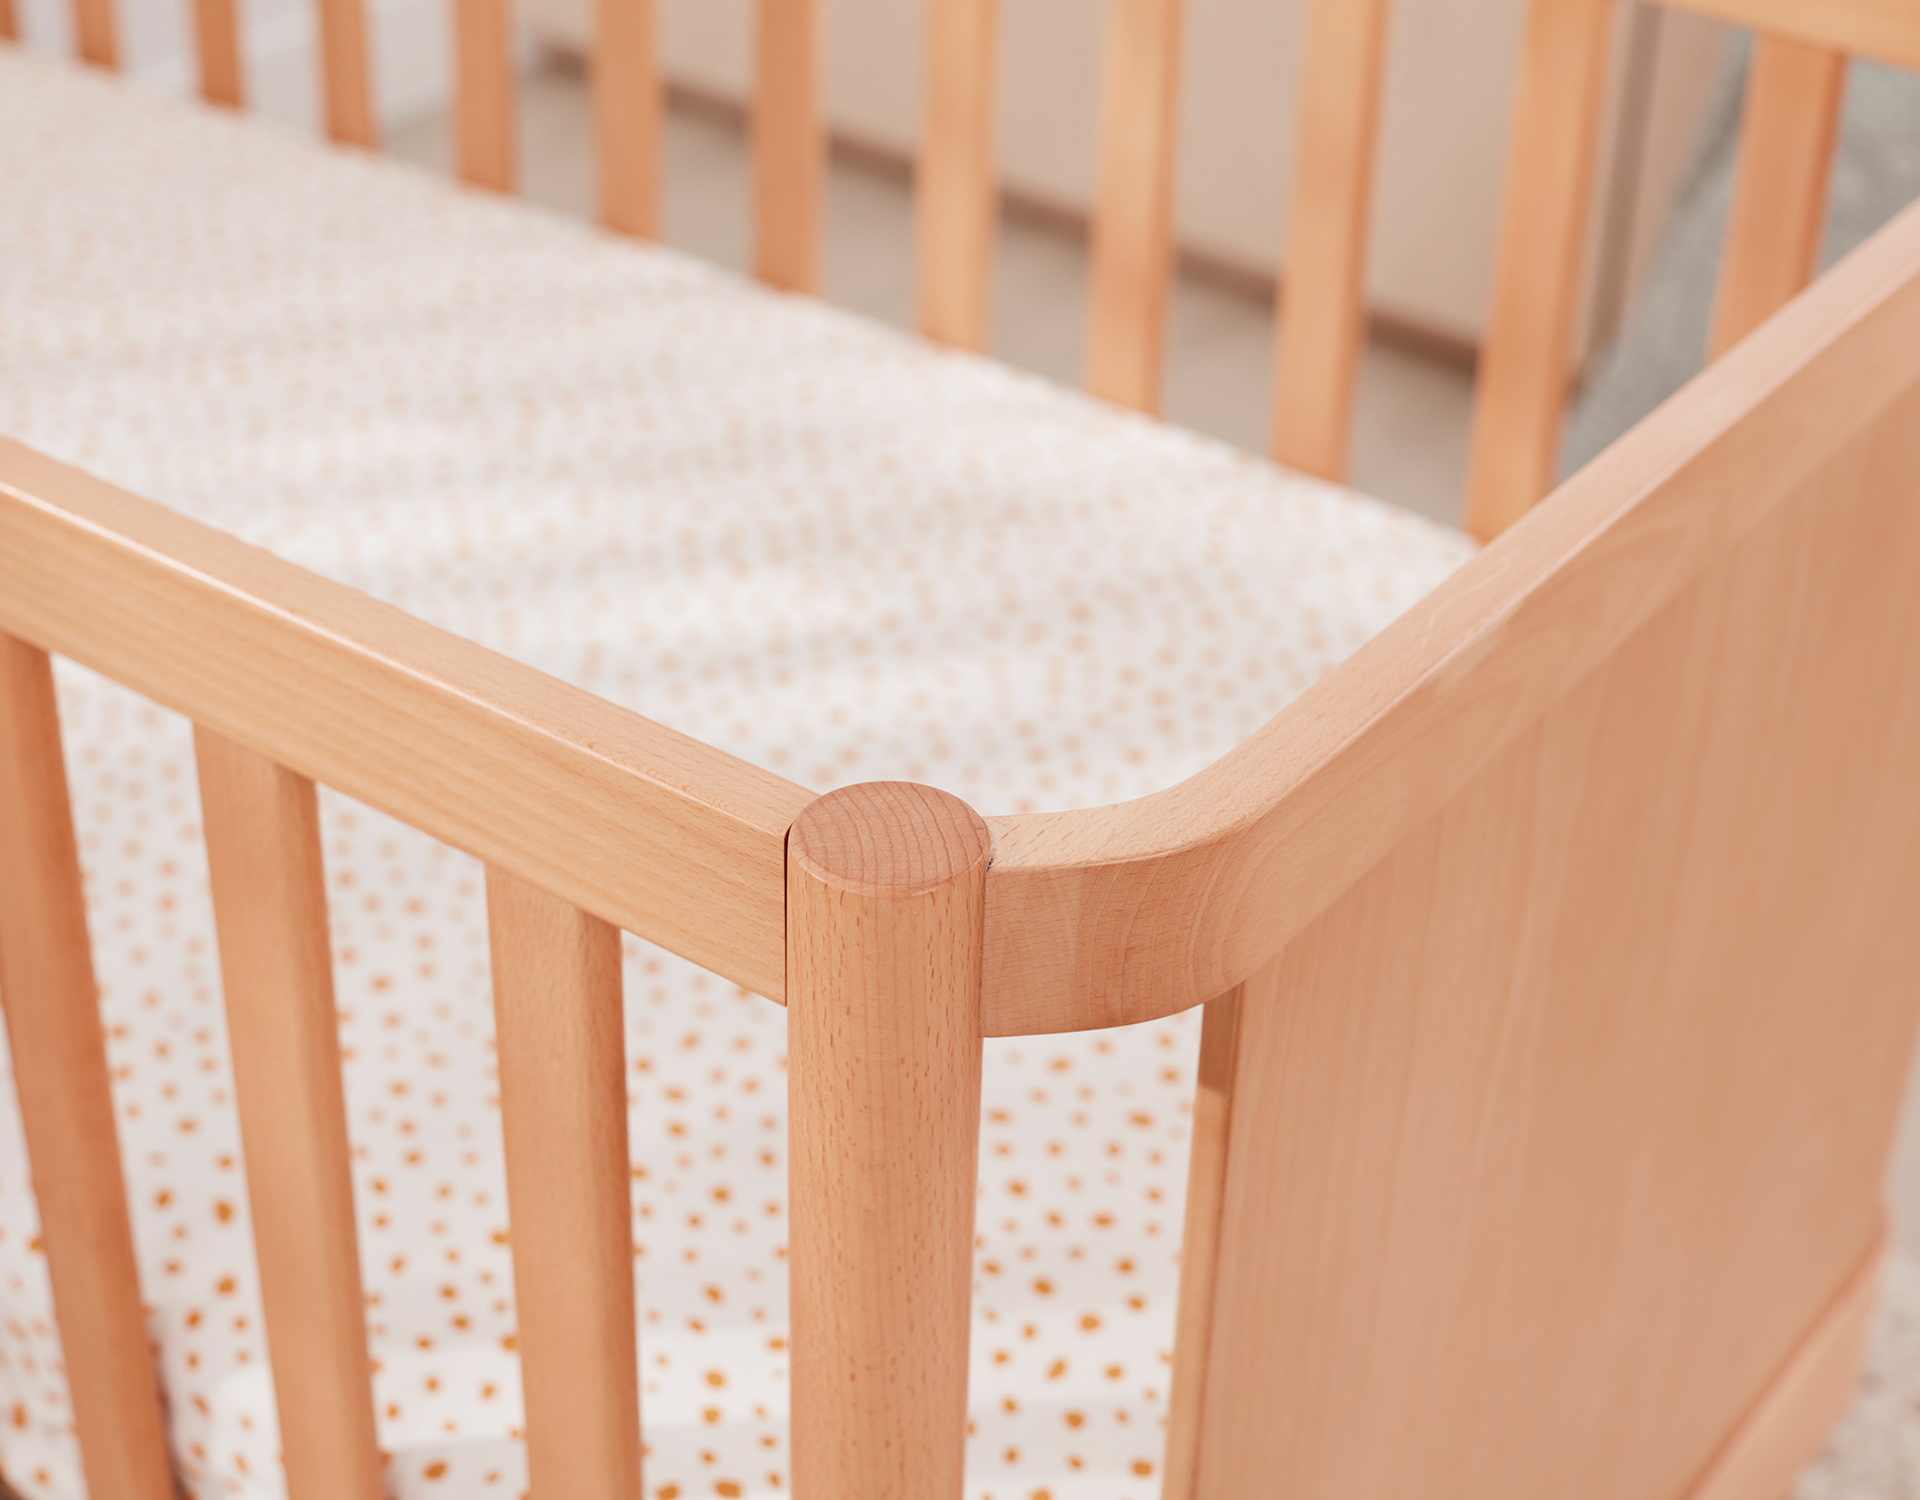 A close up shot of a light timber cot with best baby mattress inside , which is lightly patterned 